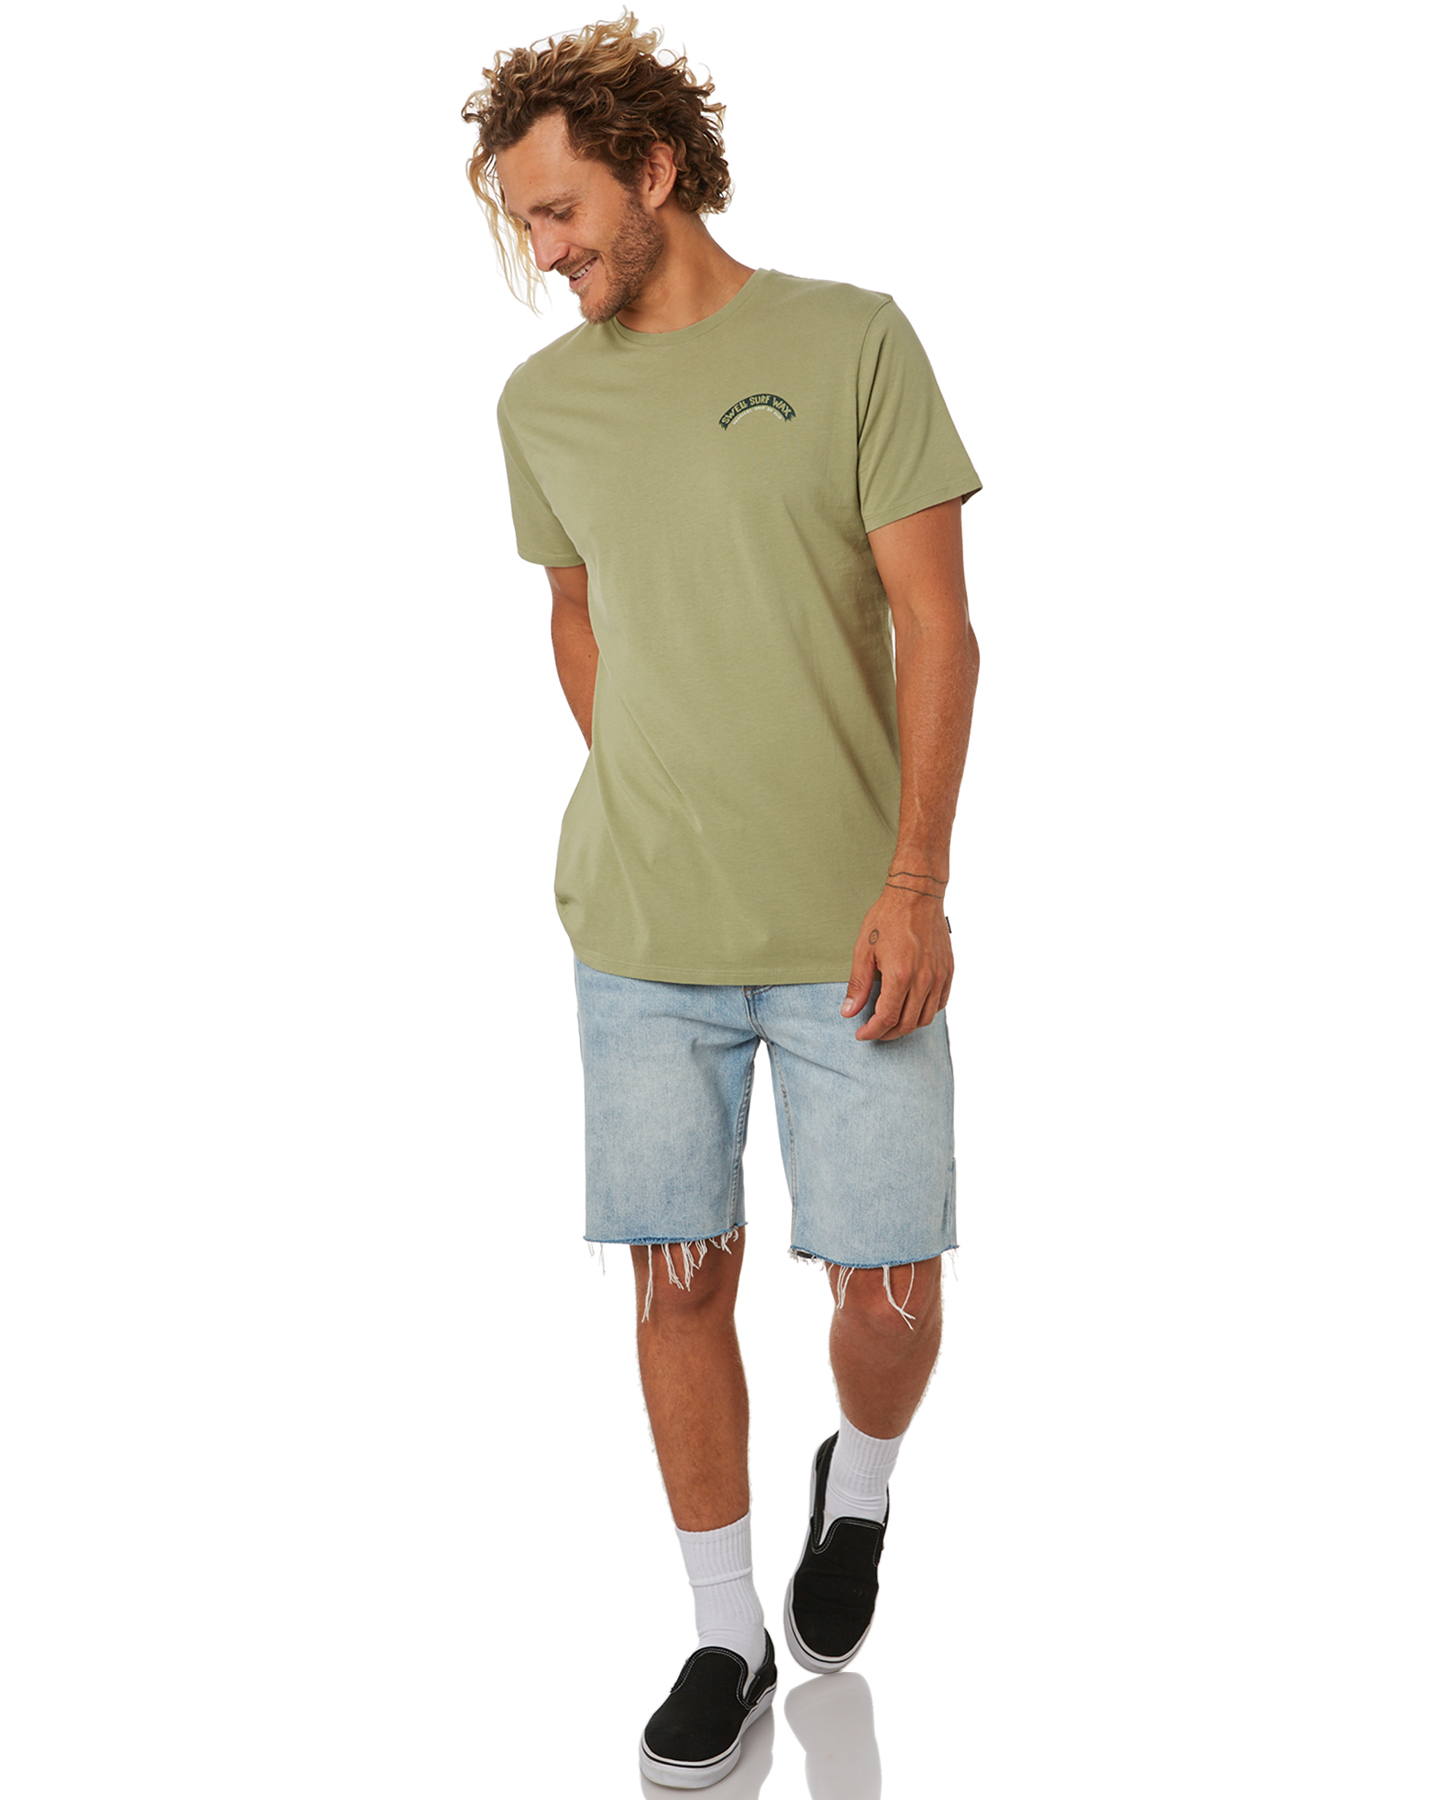 Swell Tropical Grip Mens Tee - Seaweed | SurfStitch